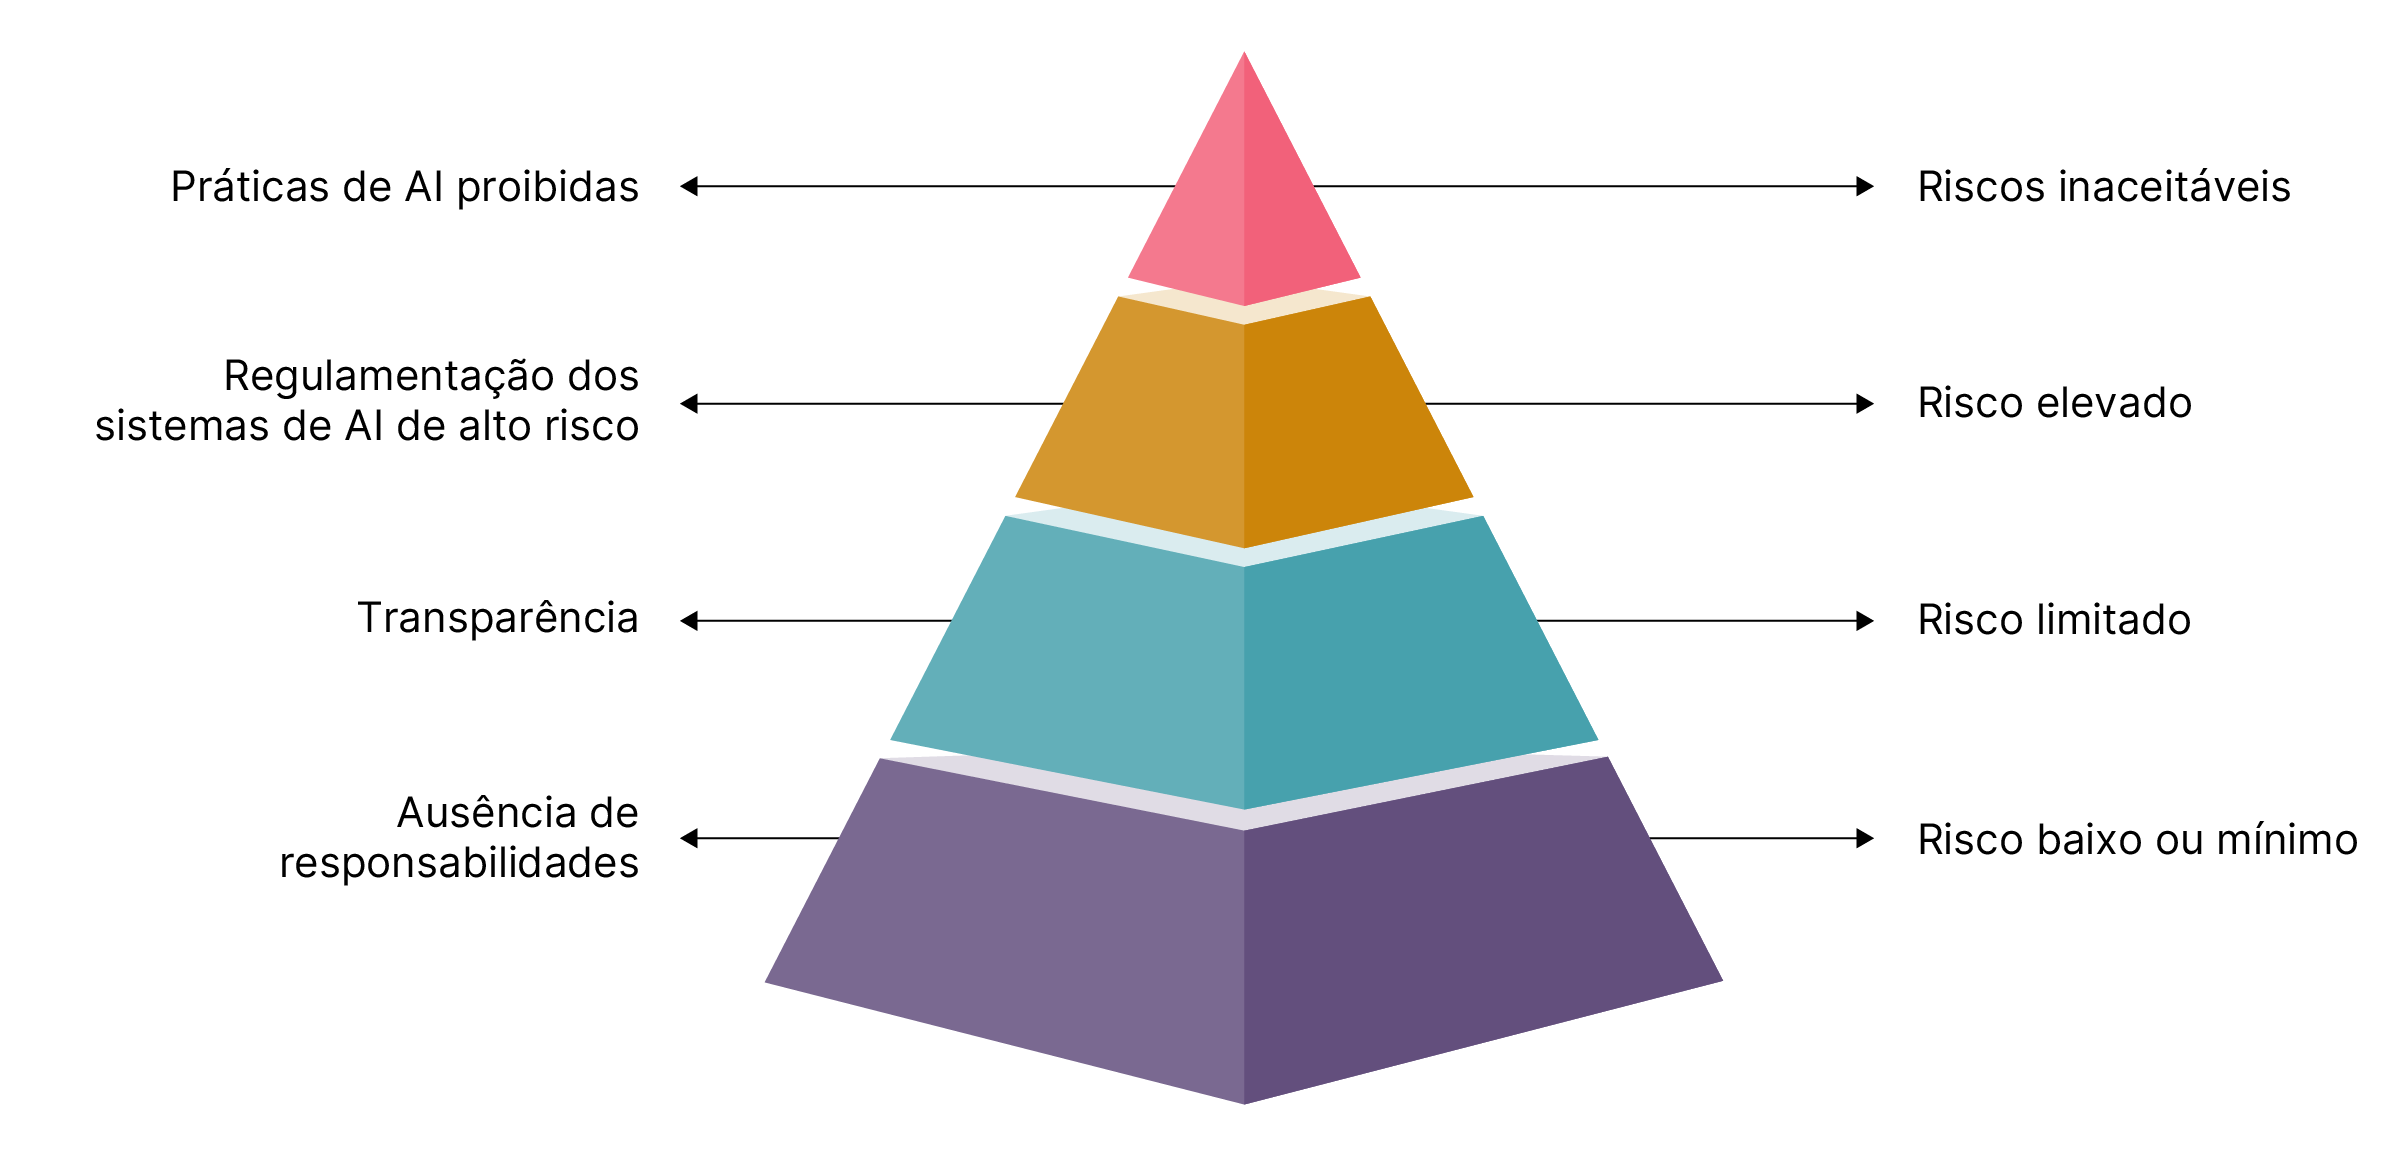 Pyramid chart of level of risk for AI systems where no obligations are low risk, transparency is limited risk, regulated high risk AI systems are high risk, and prohibited AI practices are an unacceptable risk.